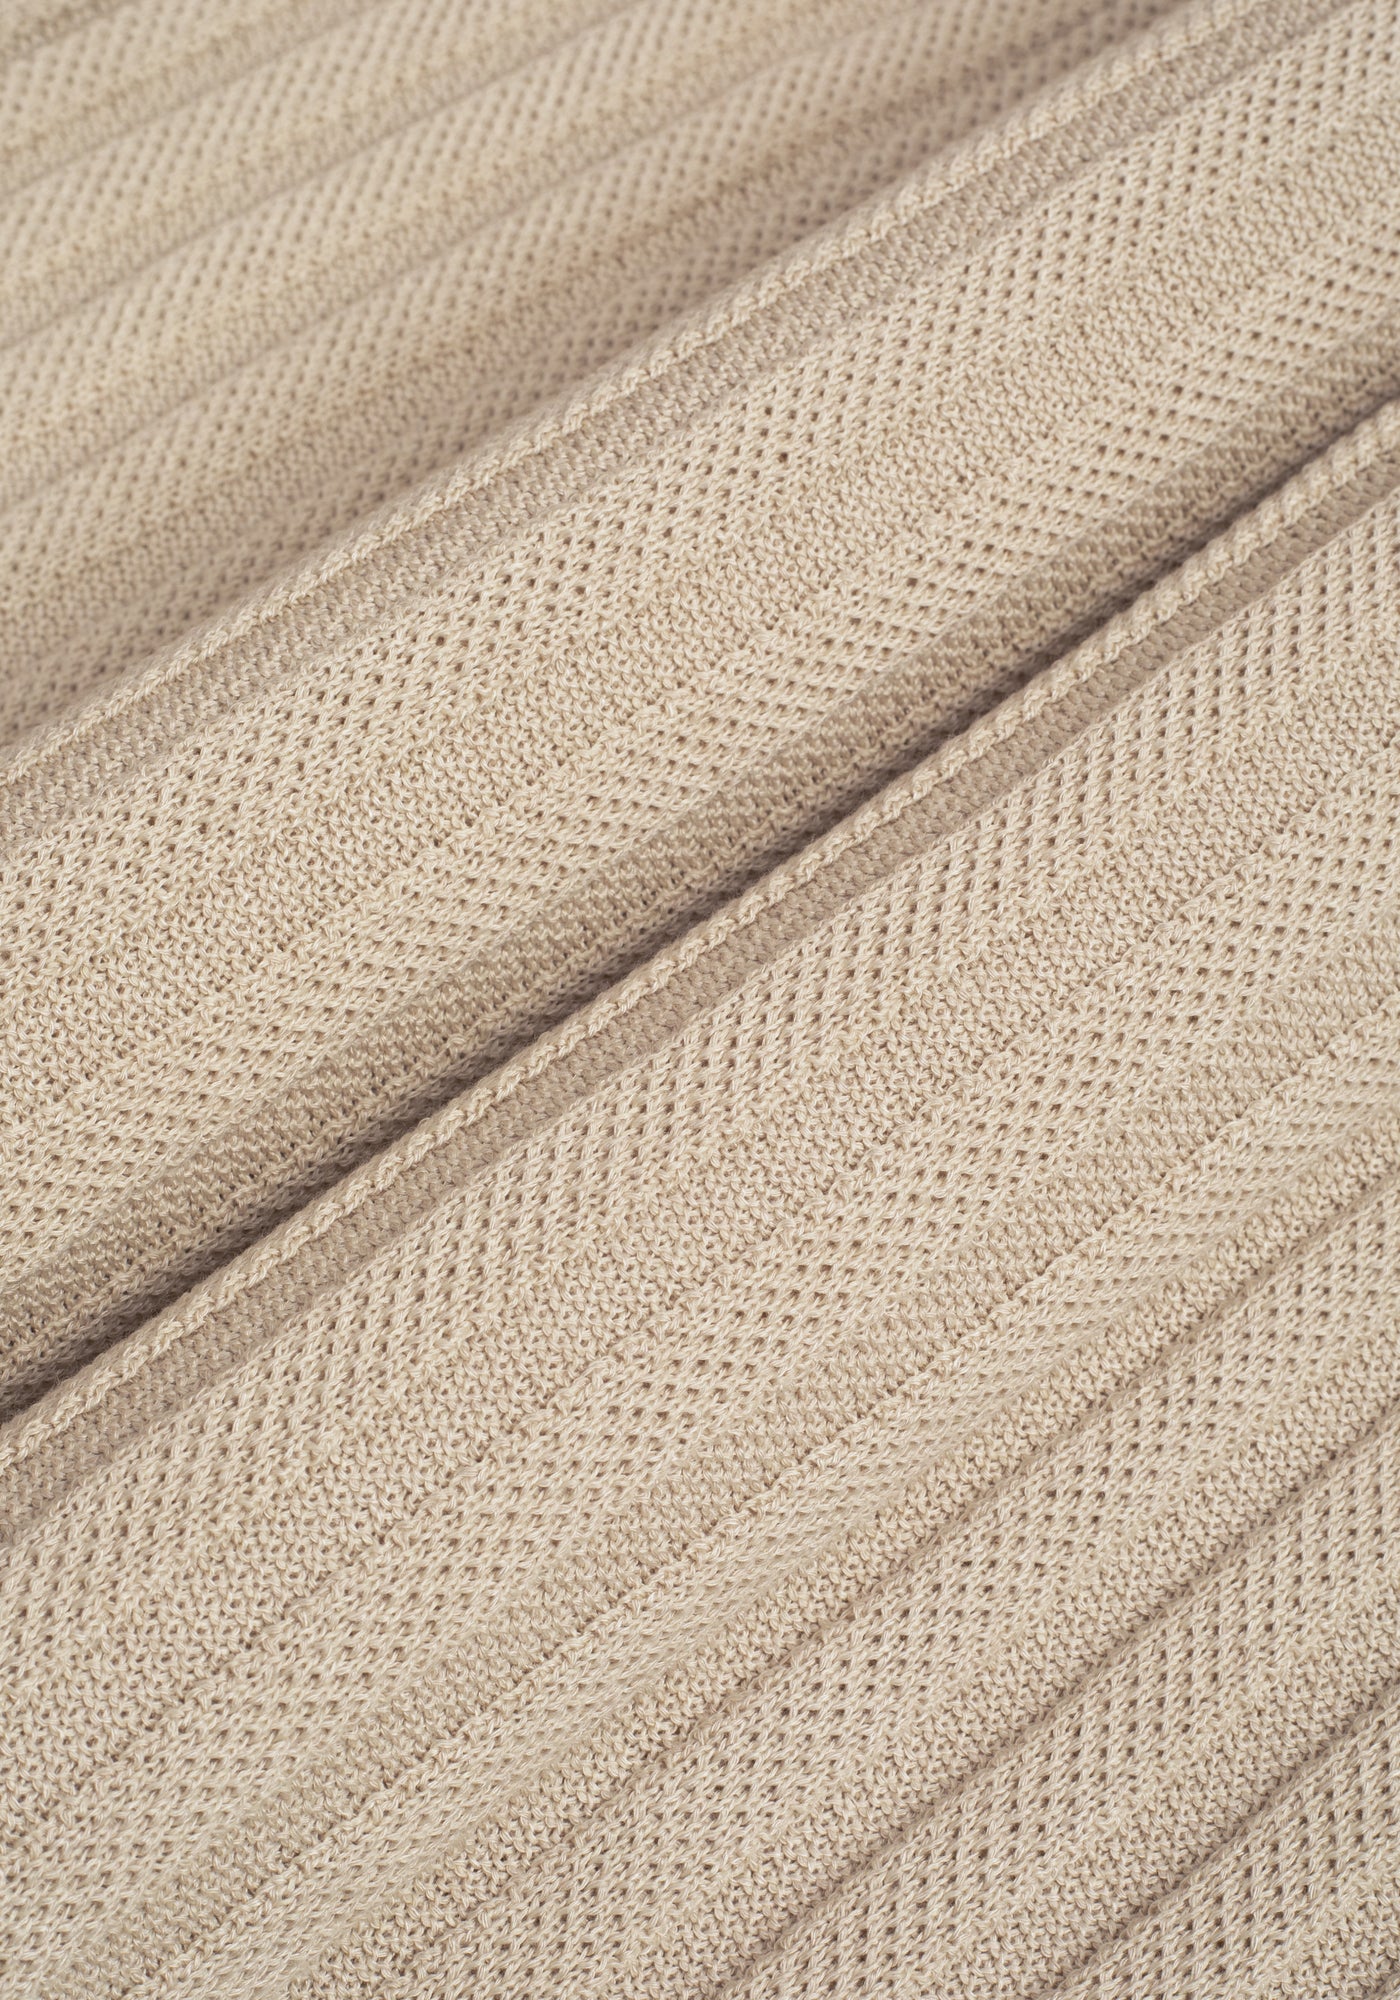 Toffee Beige Stripe Knitted Polo Shirt